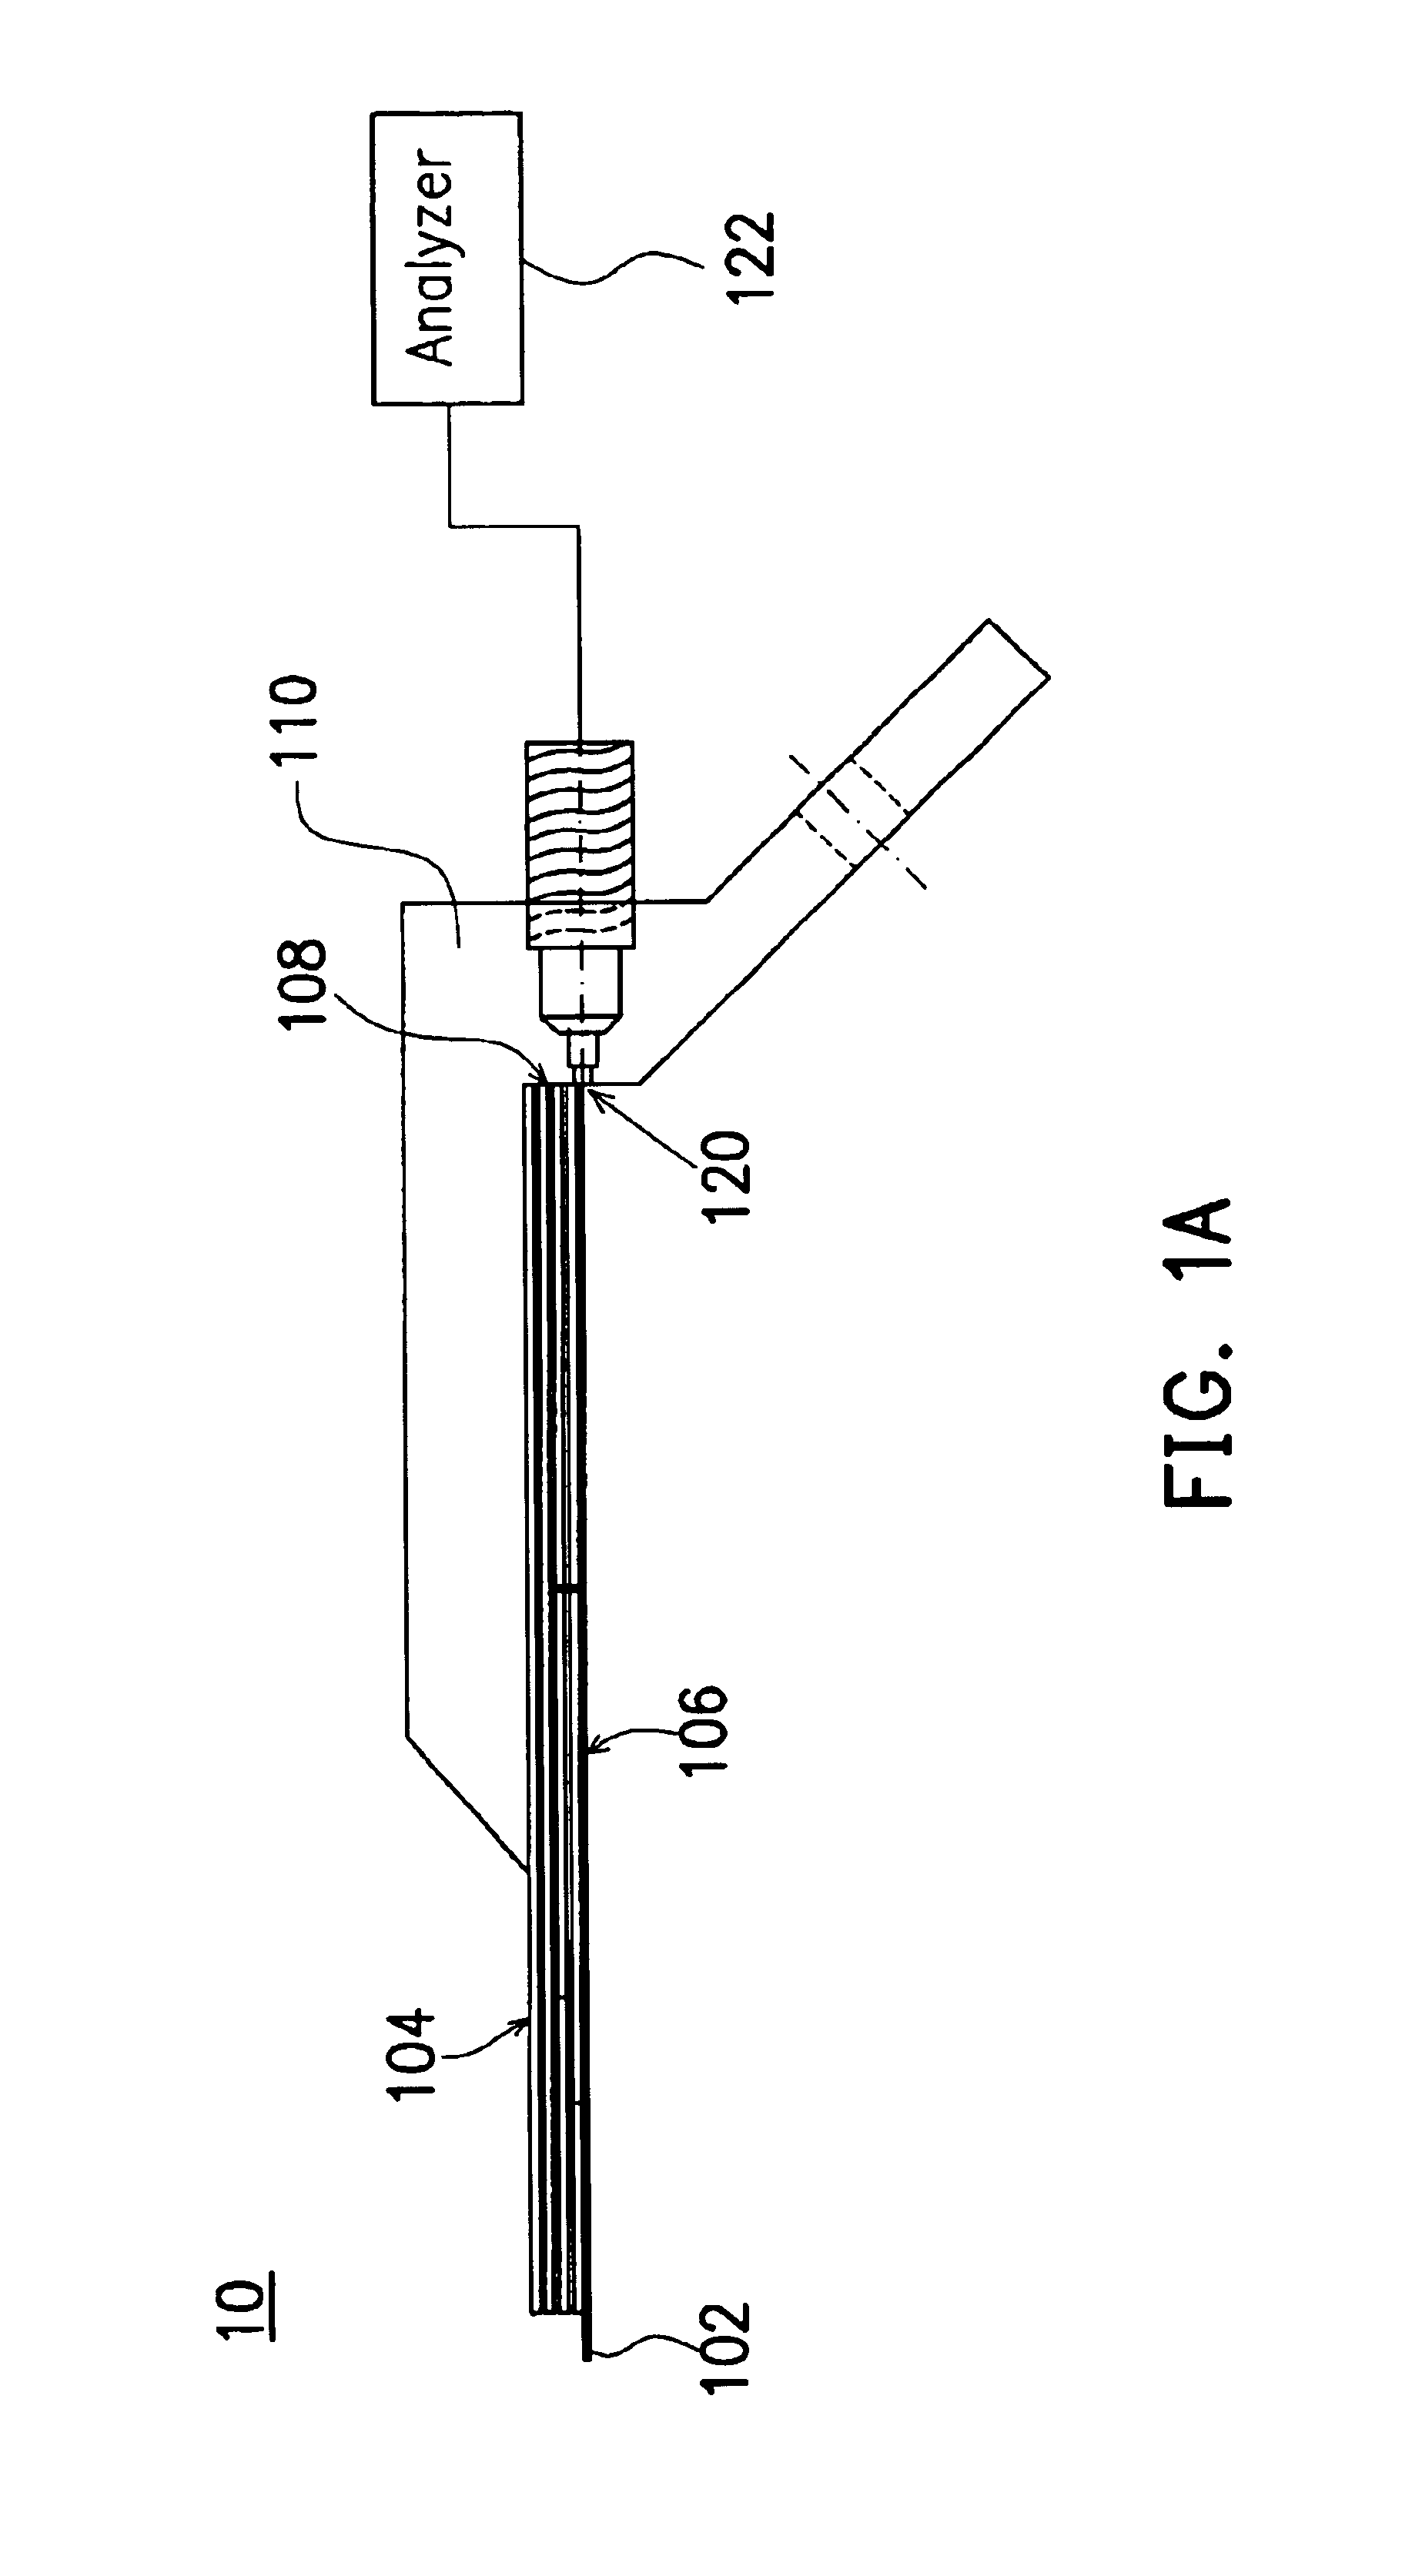 Flexible multi-layered probe for measuring a signal from an object